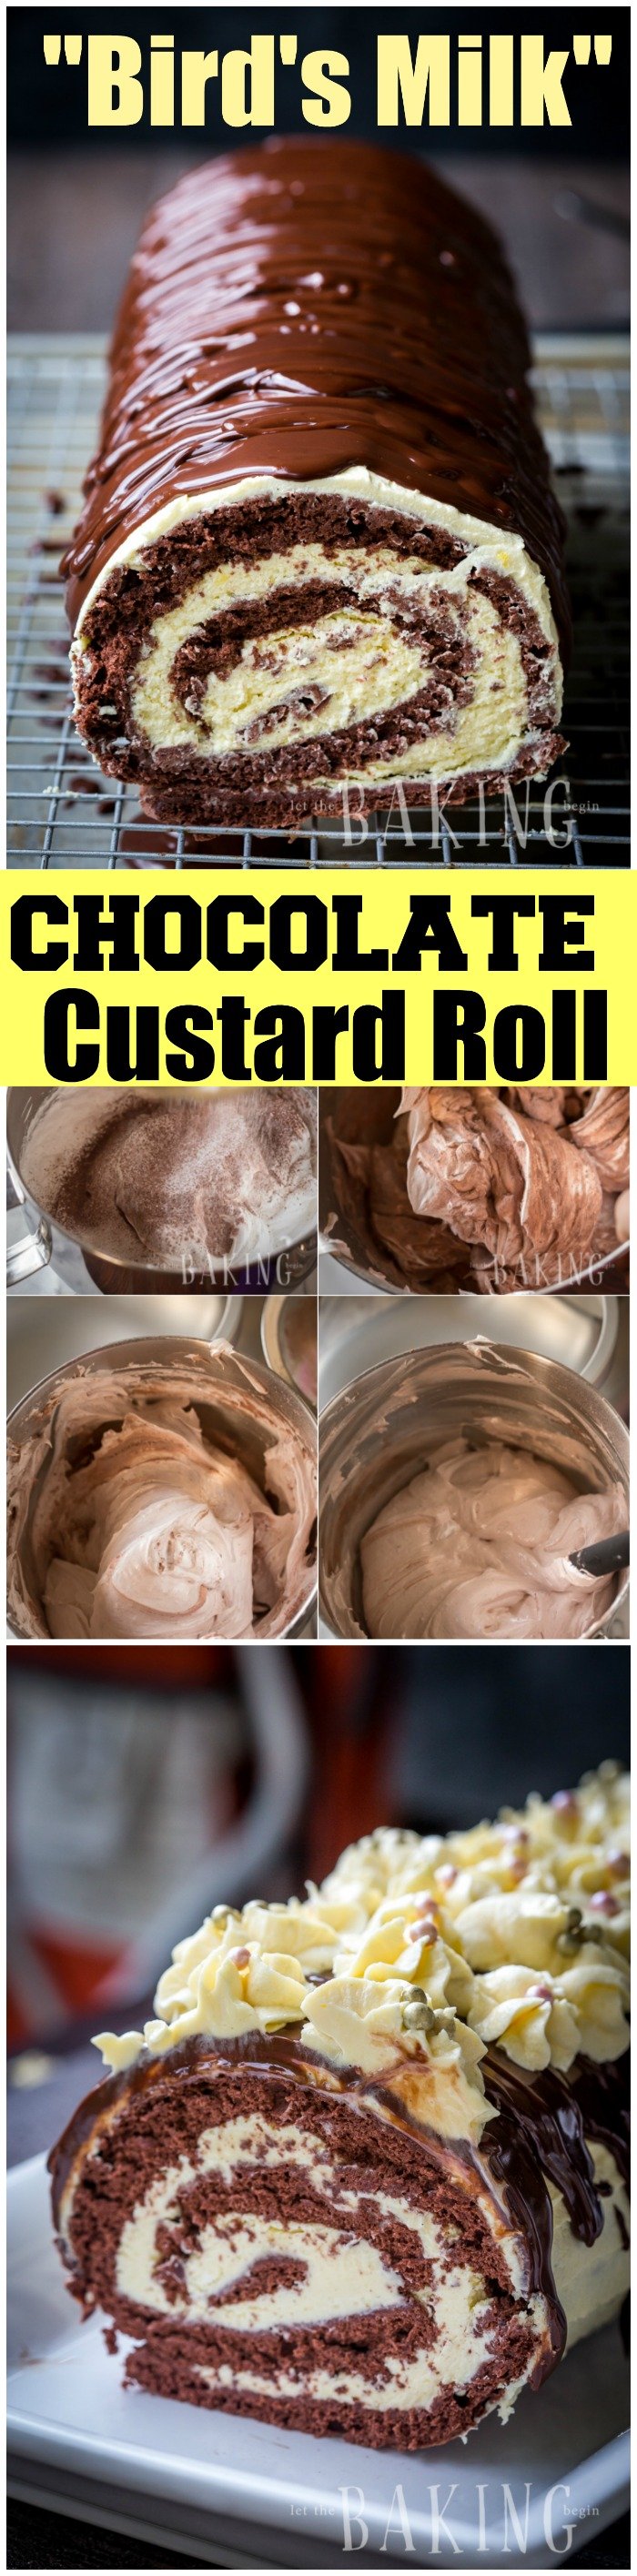 Chocolate Custard Roll - {Birds Milk Roll} - A foolproof recipe with photo step by step instructions | Let the Baking Begin!